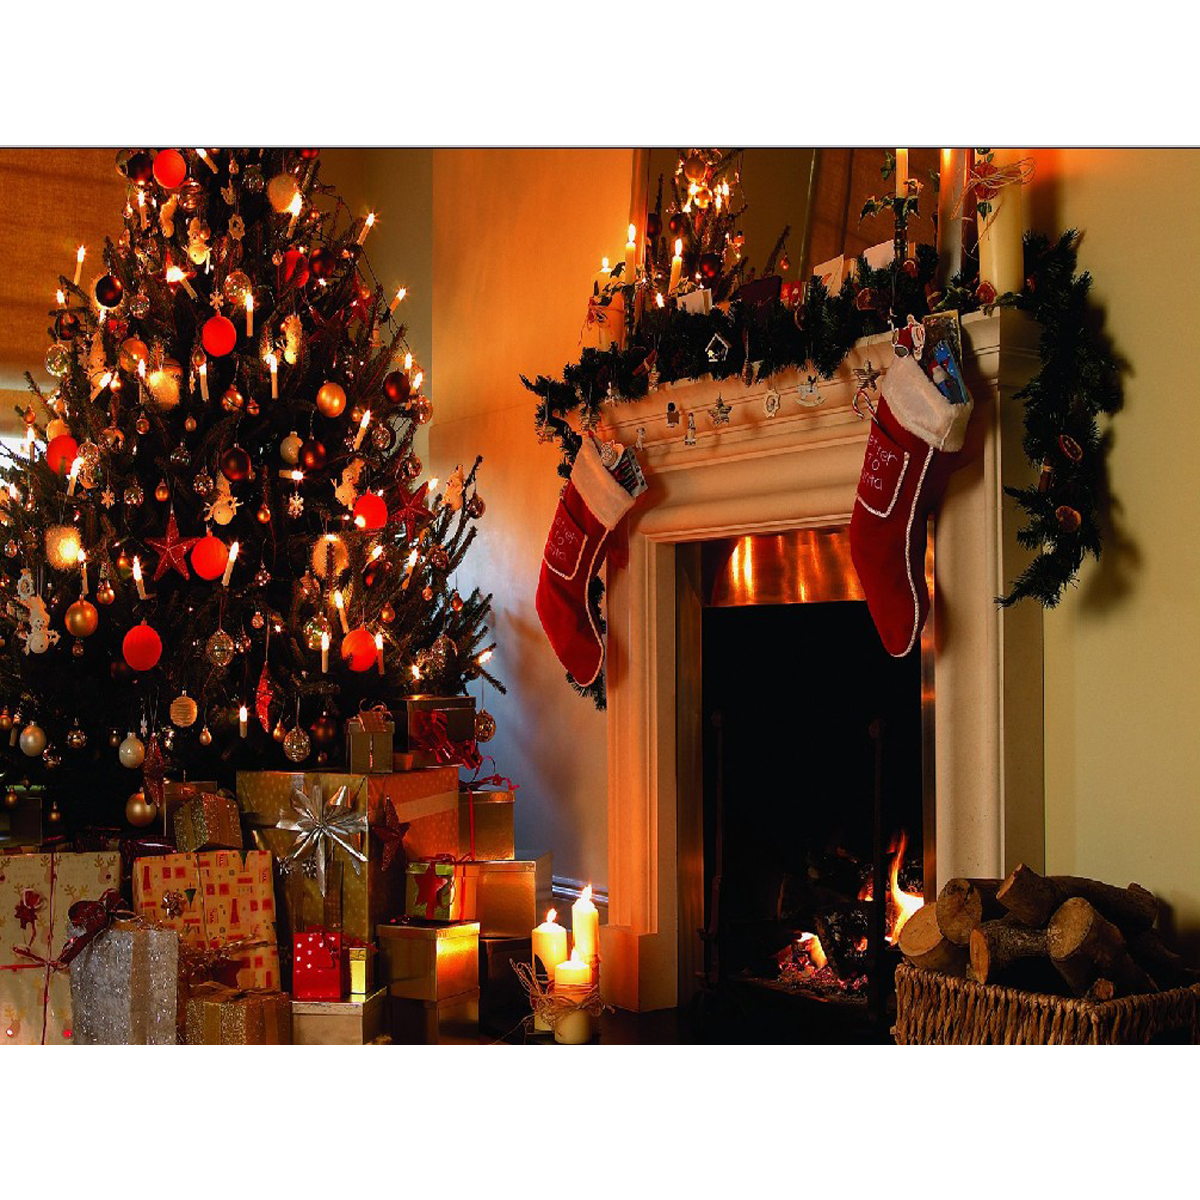 152m-Fireplace-Christmas-Photography-Background-Cloth-Backdrops-Decoration-Toys-1338653-1